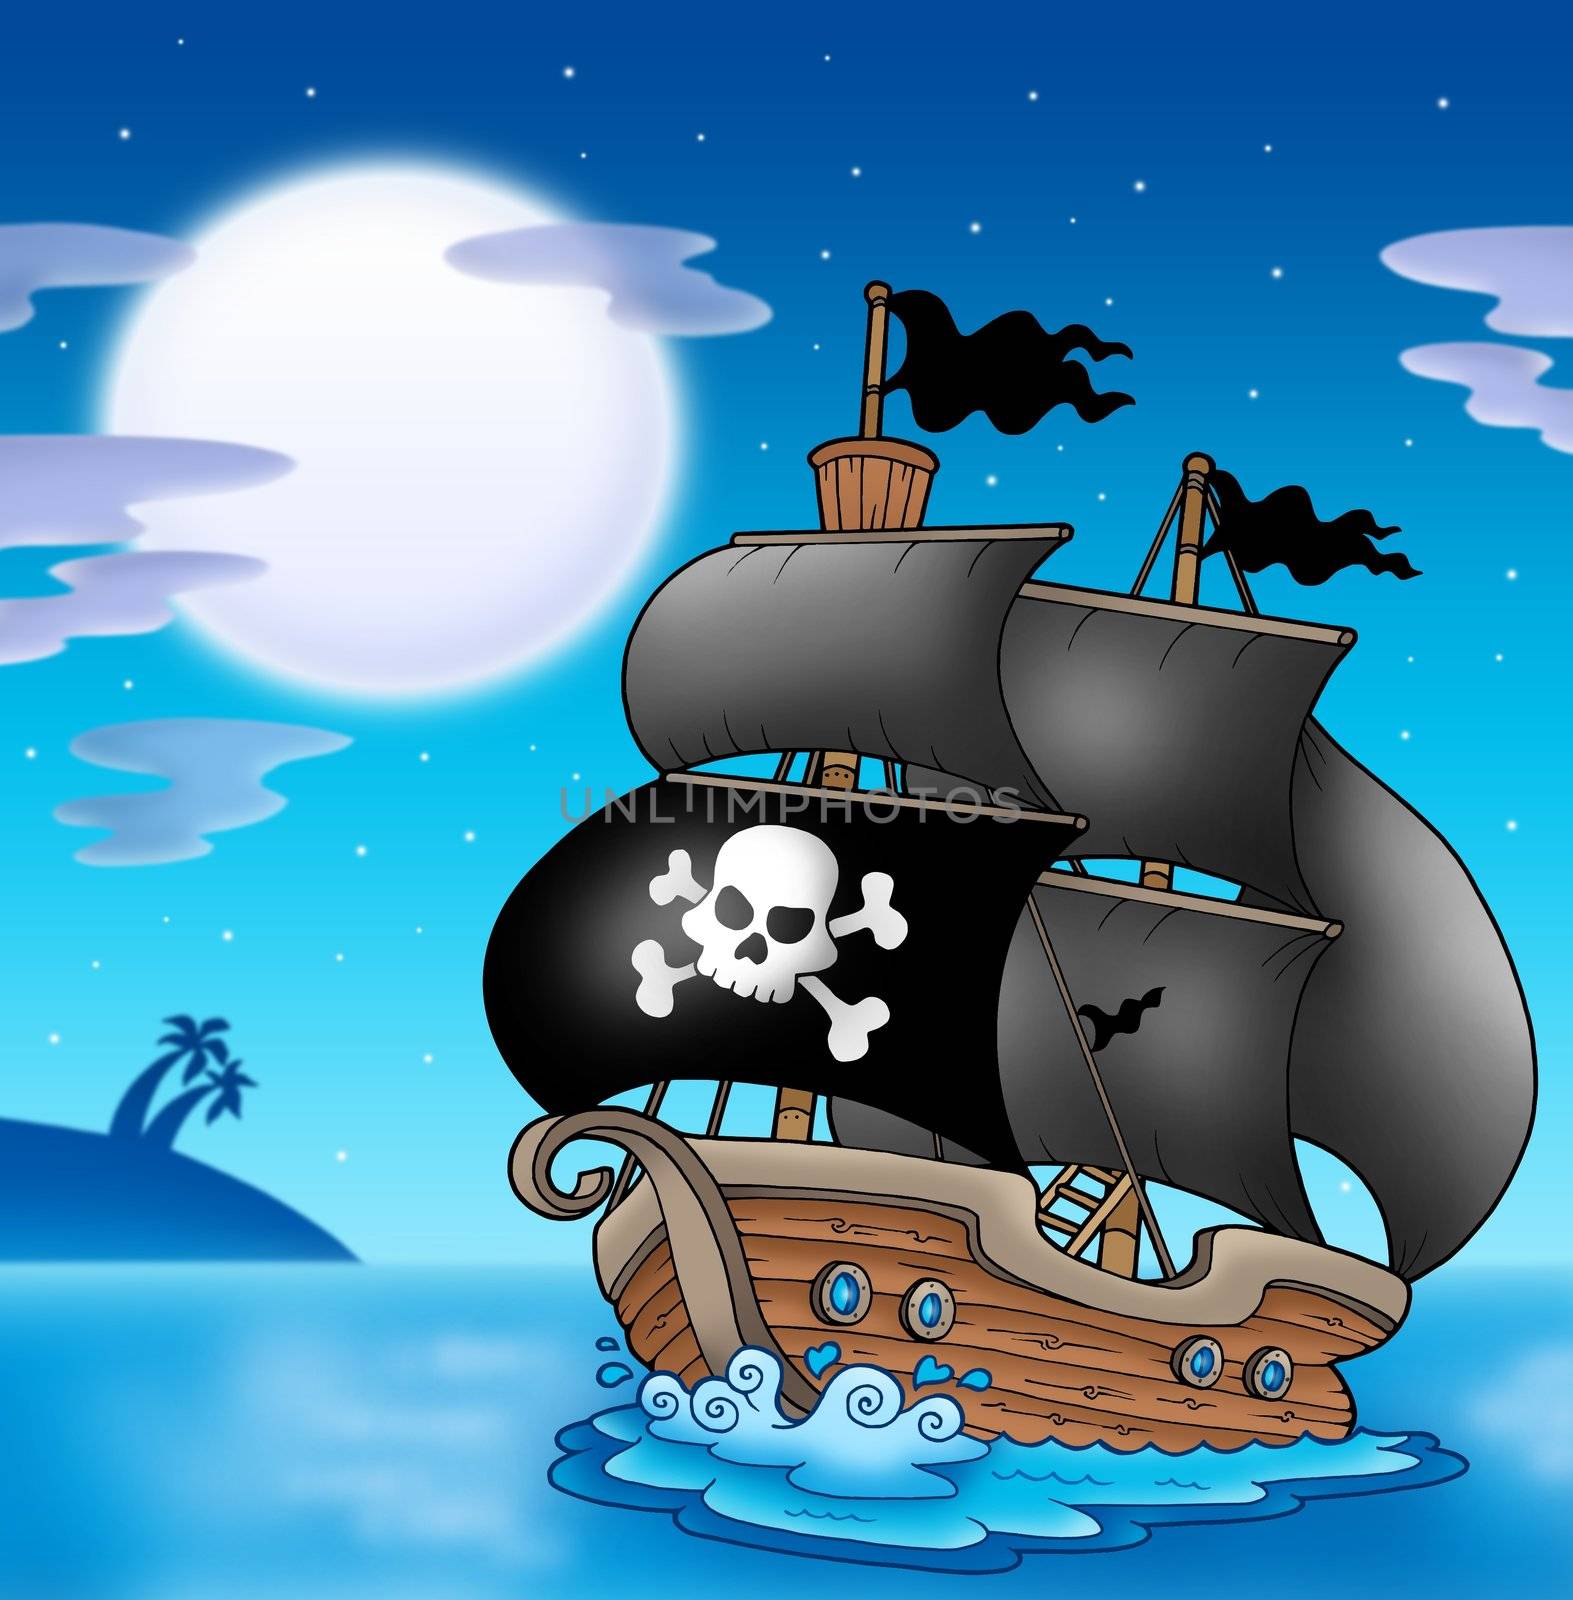 Pirate sailboat with Moon - color illustration.